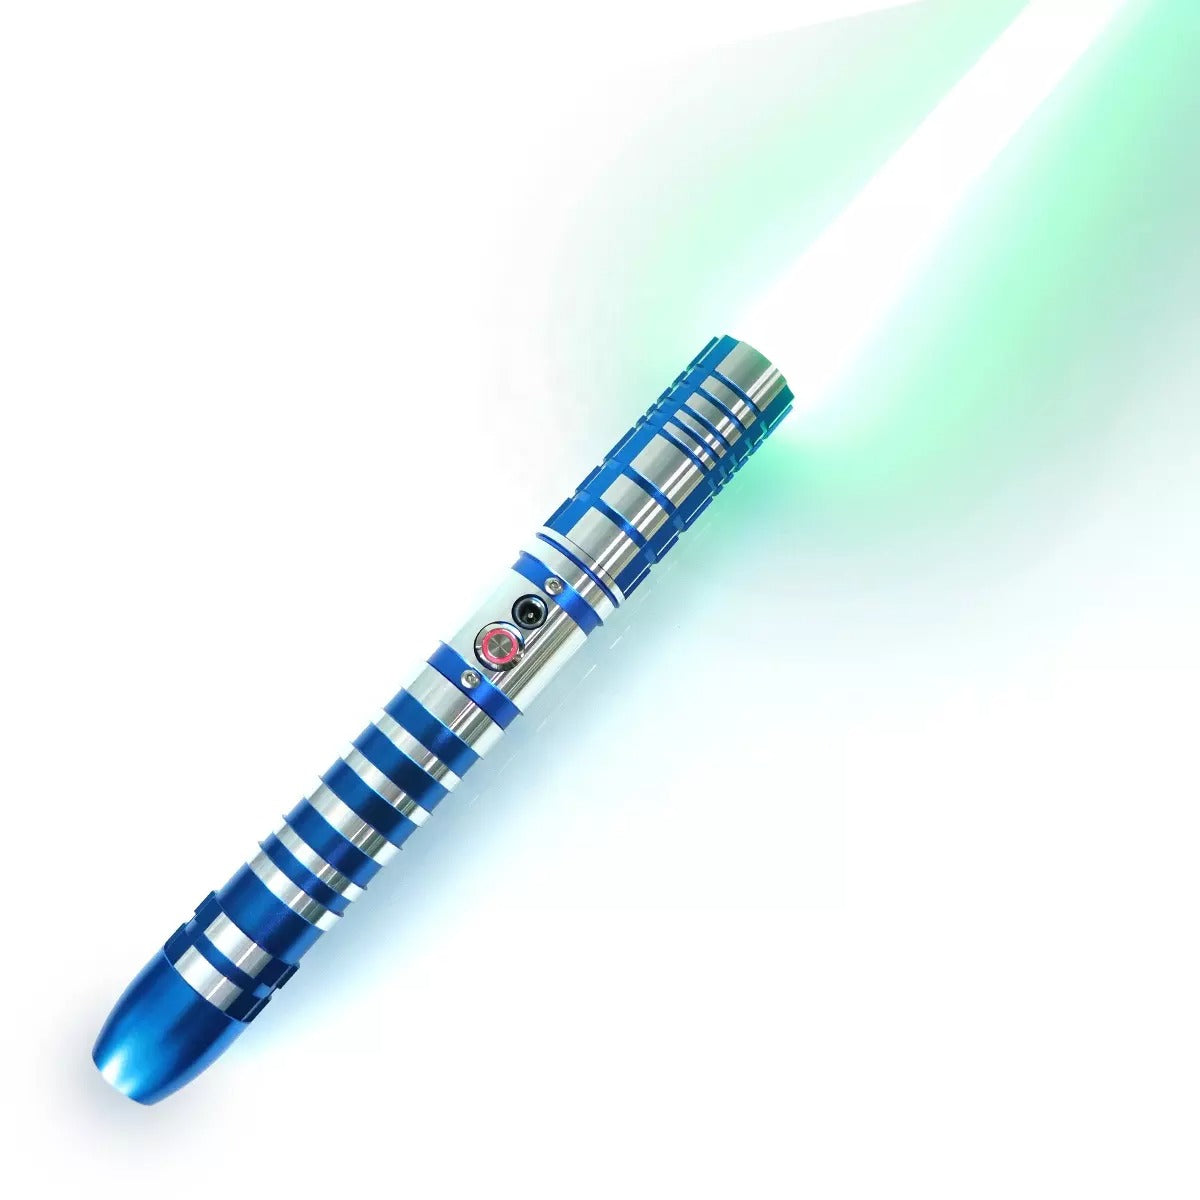 Infinite color changing heavy dueling lightsaber